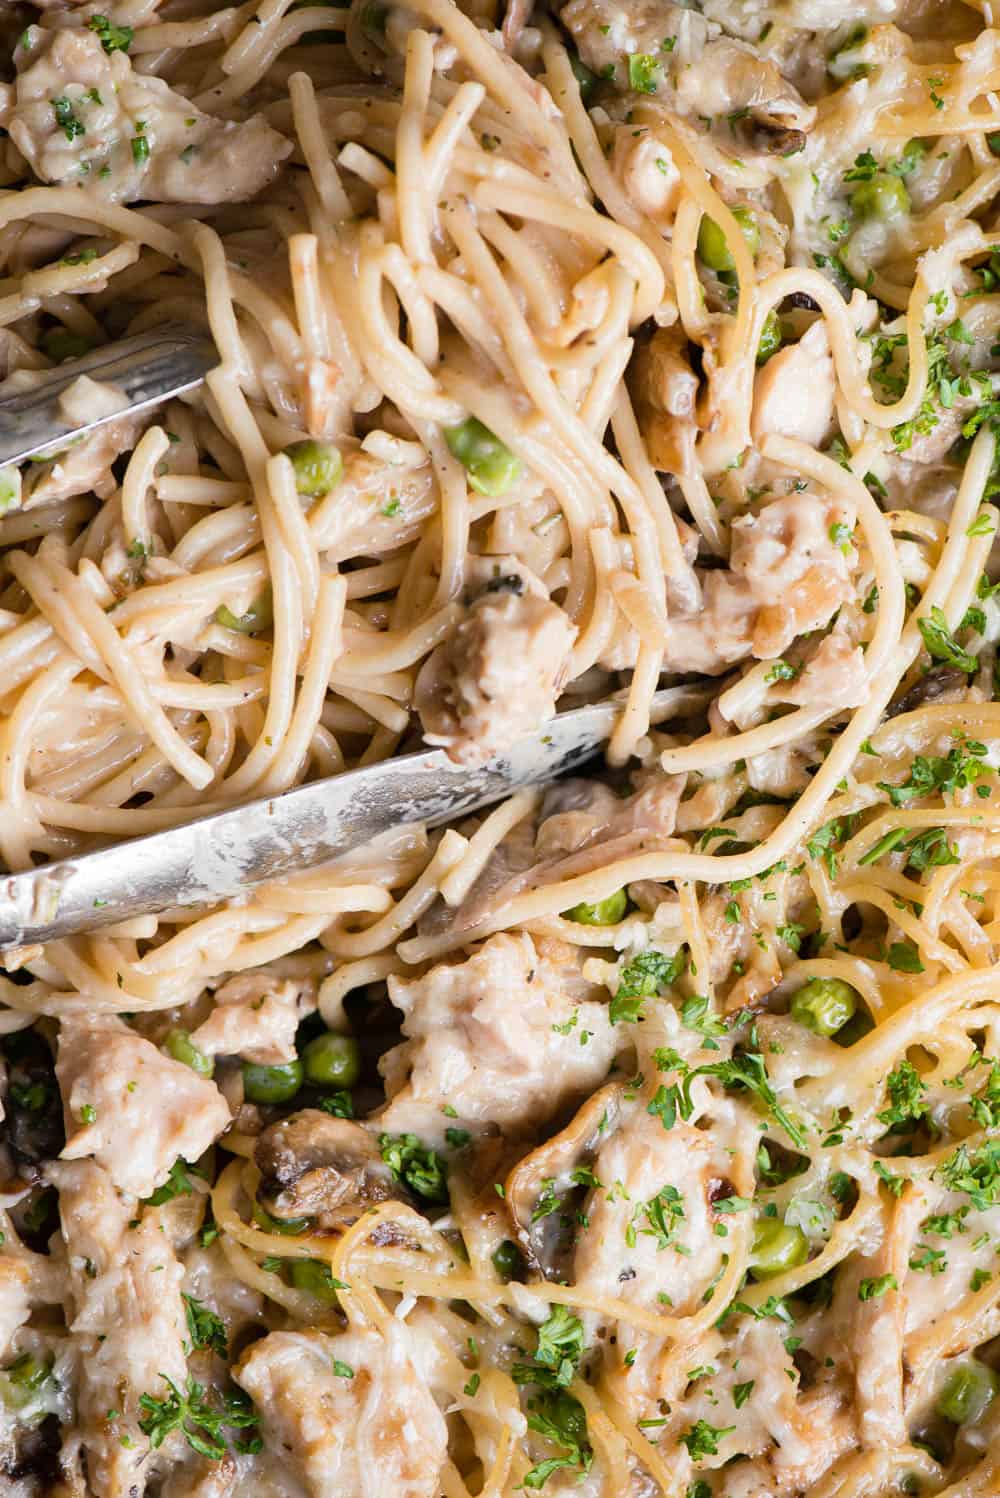 tongs holding spaghetti with turkey, vegetables, and cream sauce